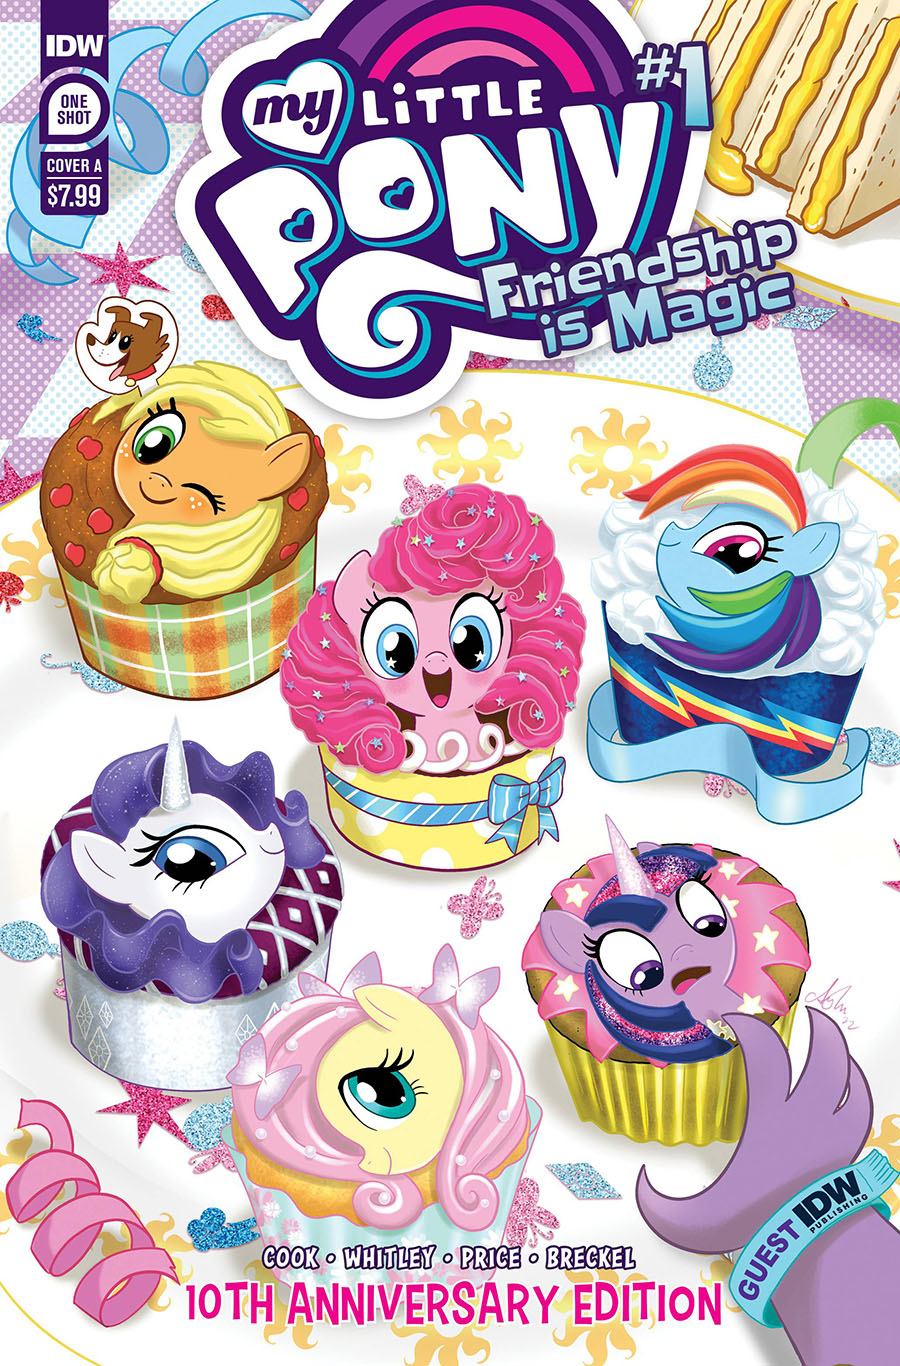 My Little Pony Friendship Is Magic 10th Anniversary Edition #1 (One Shot) Cover A Regular Amy Mebberson Cover